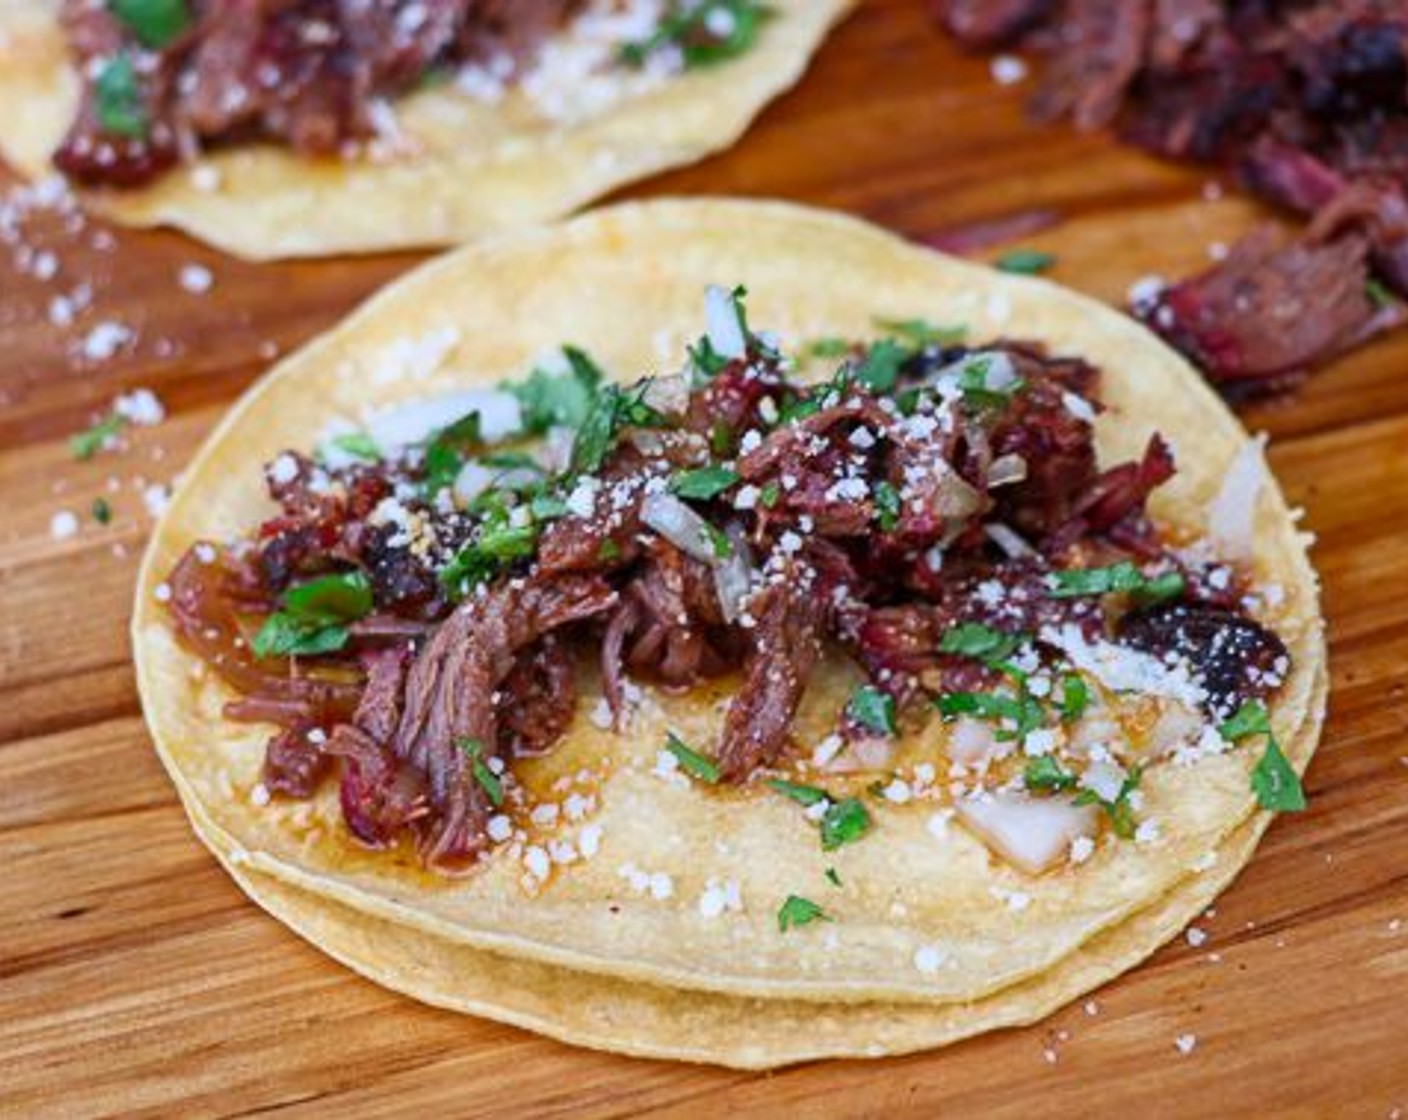 step 7 To build tacos: warm Small Corn Tortillas (12) on grill or stove top. Place shredded beef cheek on tortilla and top with White Onion (1), Fresh Cilantro (1 bunch) and Cotija Cheese (1/2 cup). Dress with a drizzle of braising liquid and serve.